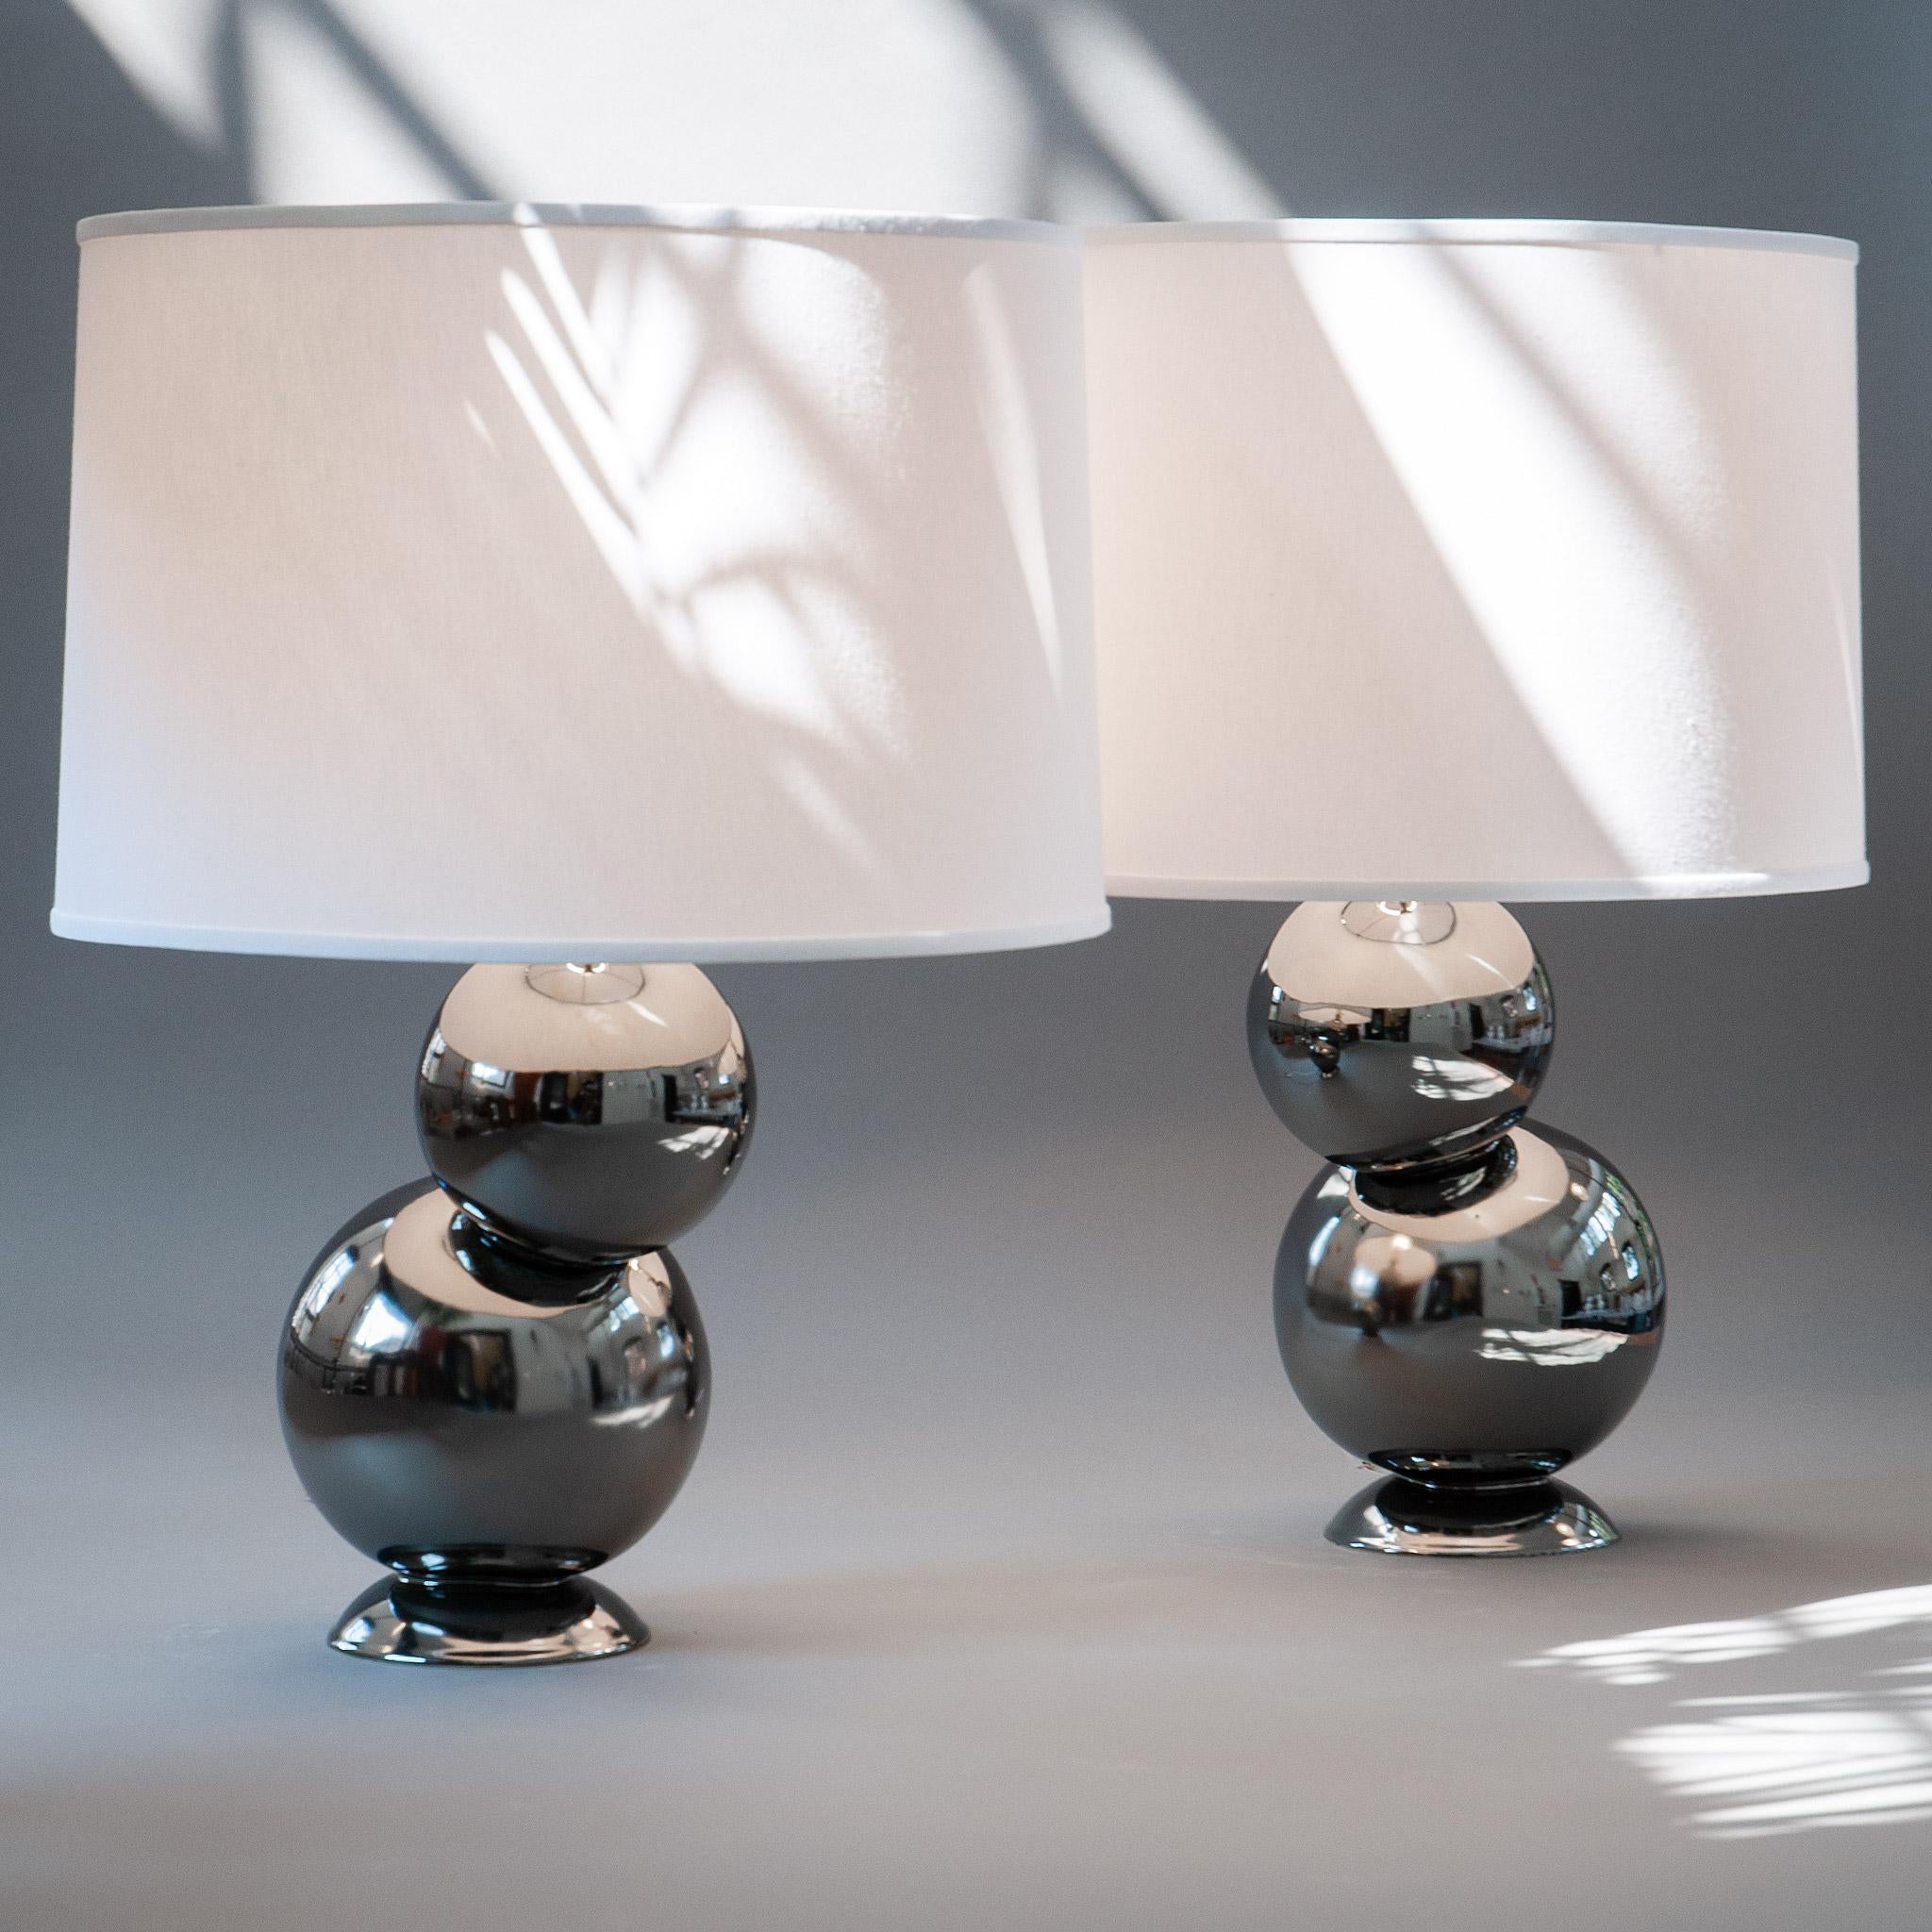 Our homage to Space Age design, the platinum bubble table lamp pair in stoneware is divine whether bookending a credenza or topping off nightstands. Assembled by hand from stoneware orbs that are placed offset from their base, and finished with a